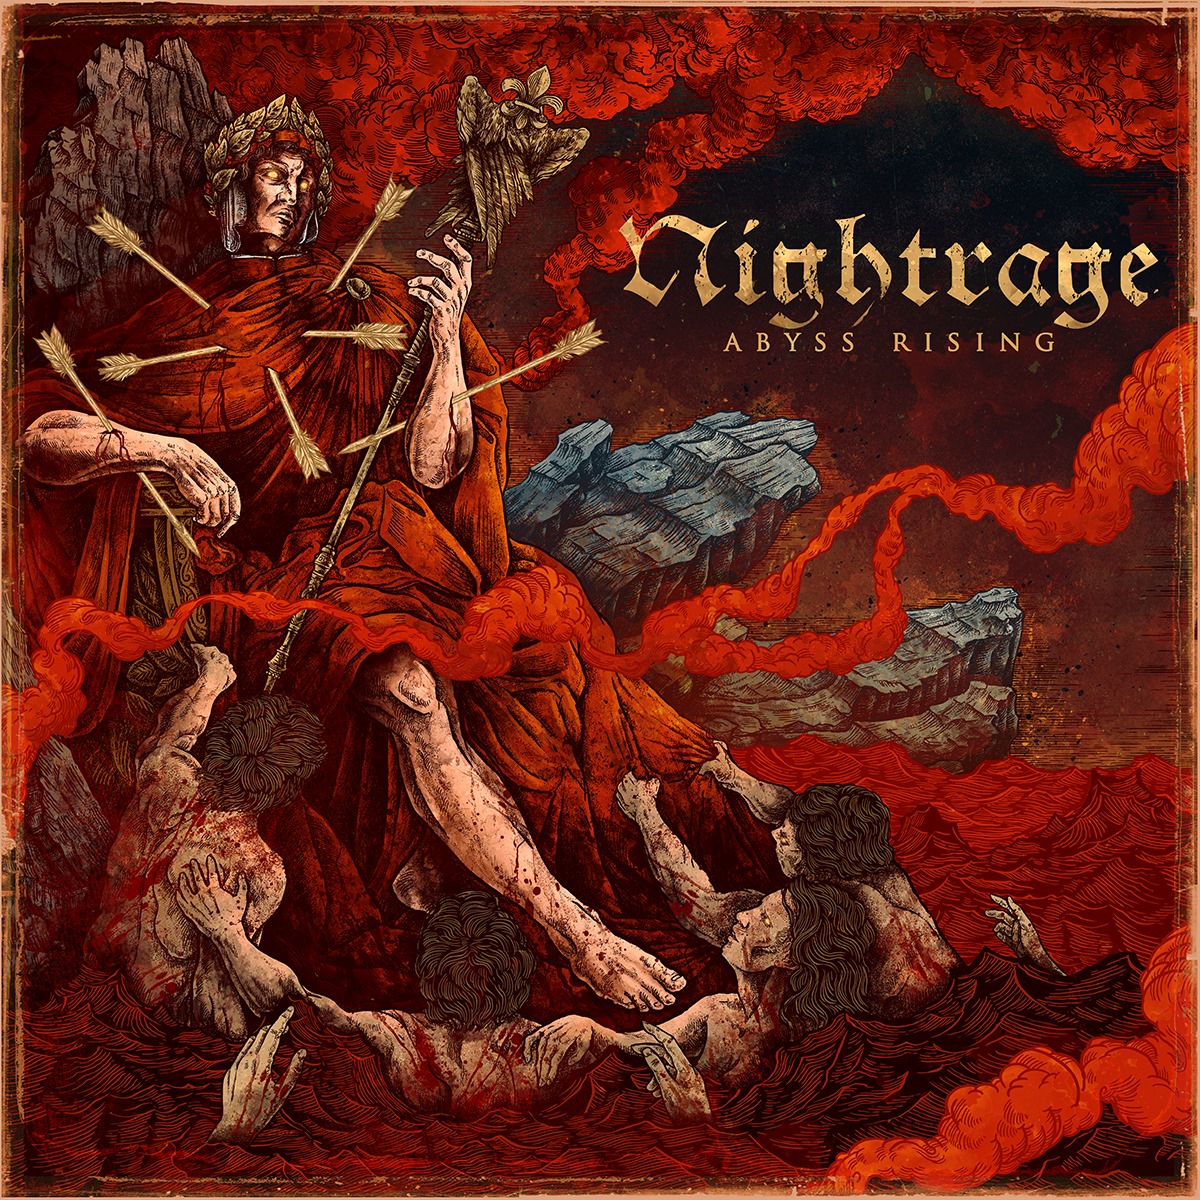 NIGHTRAGE Announce Details For Their Upcoming Album “Abyss Rising”.